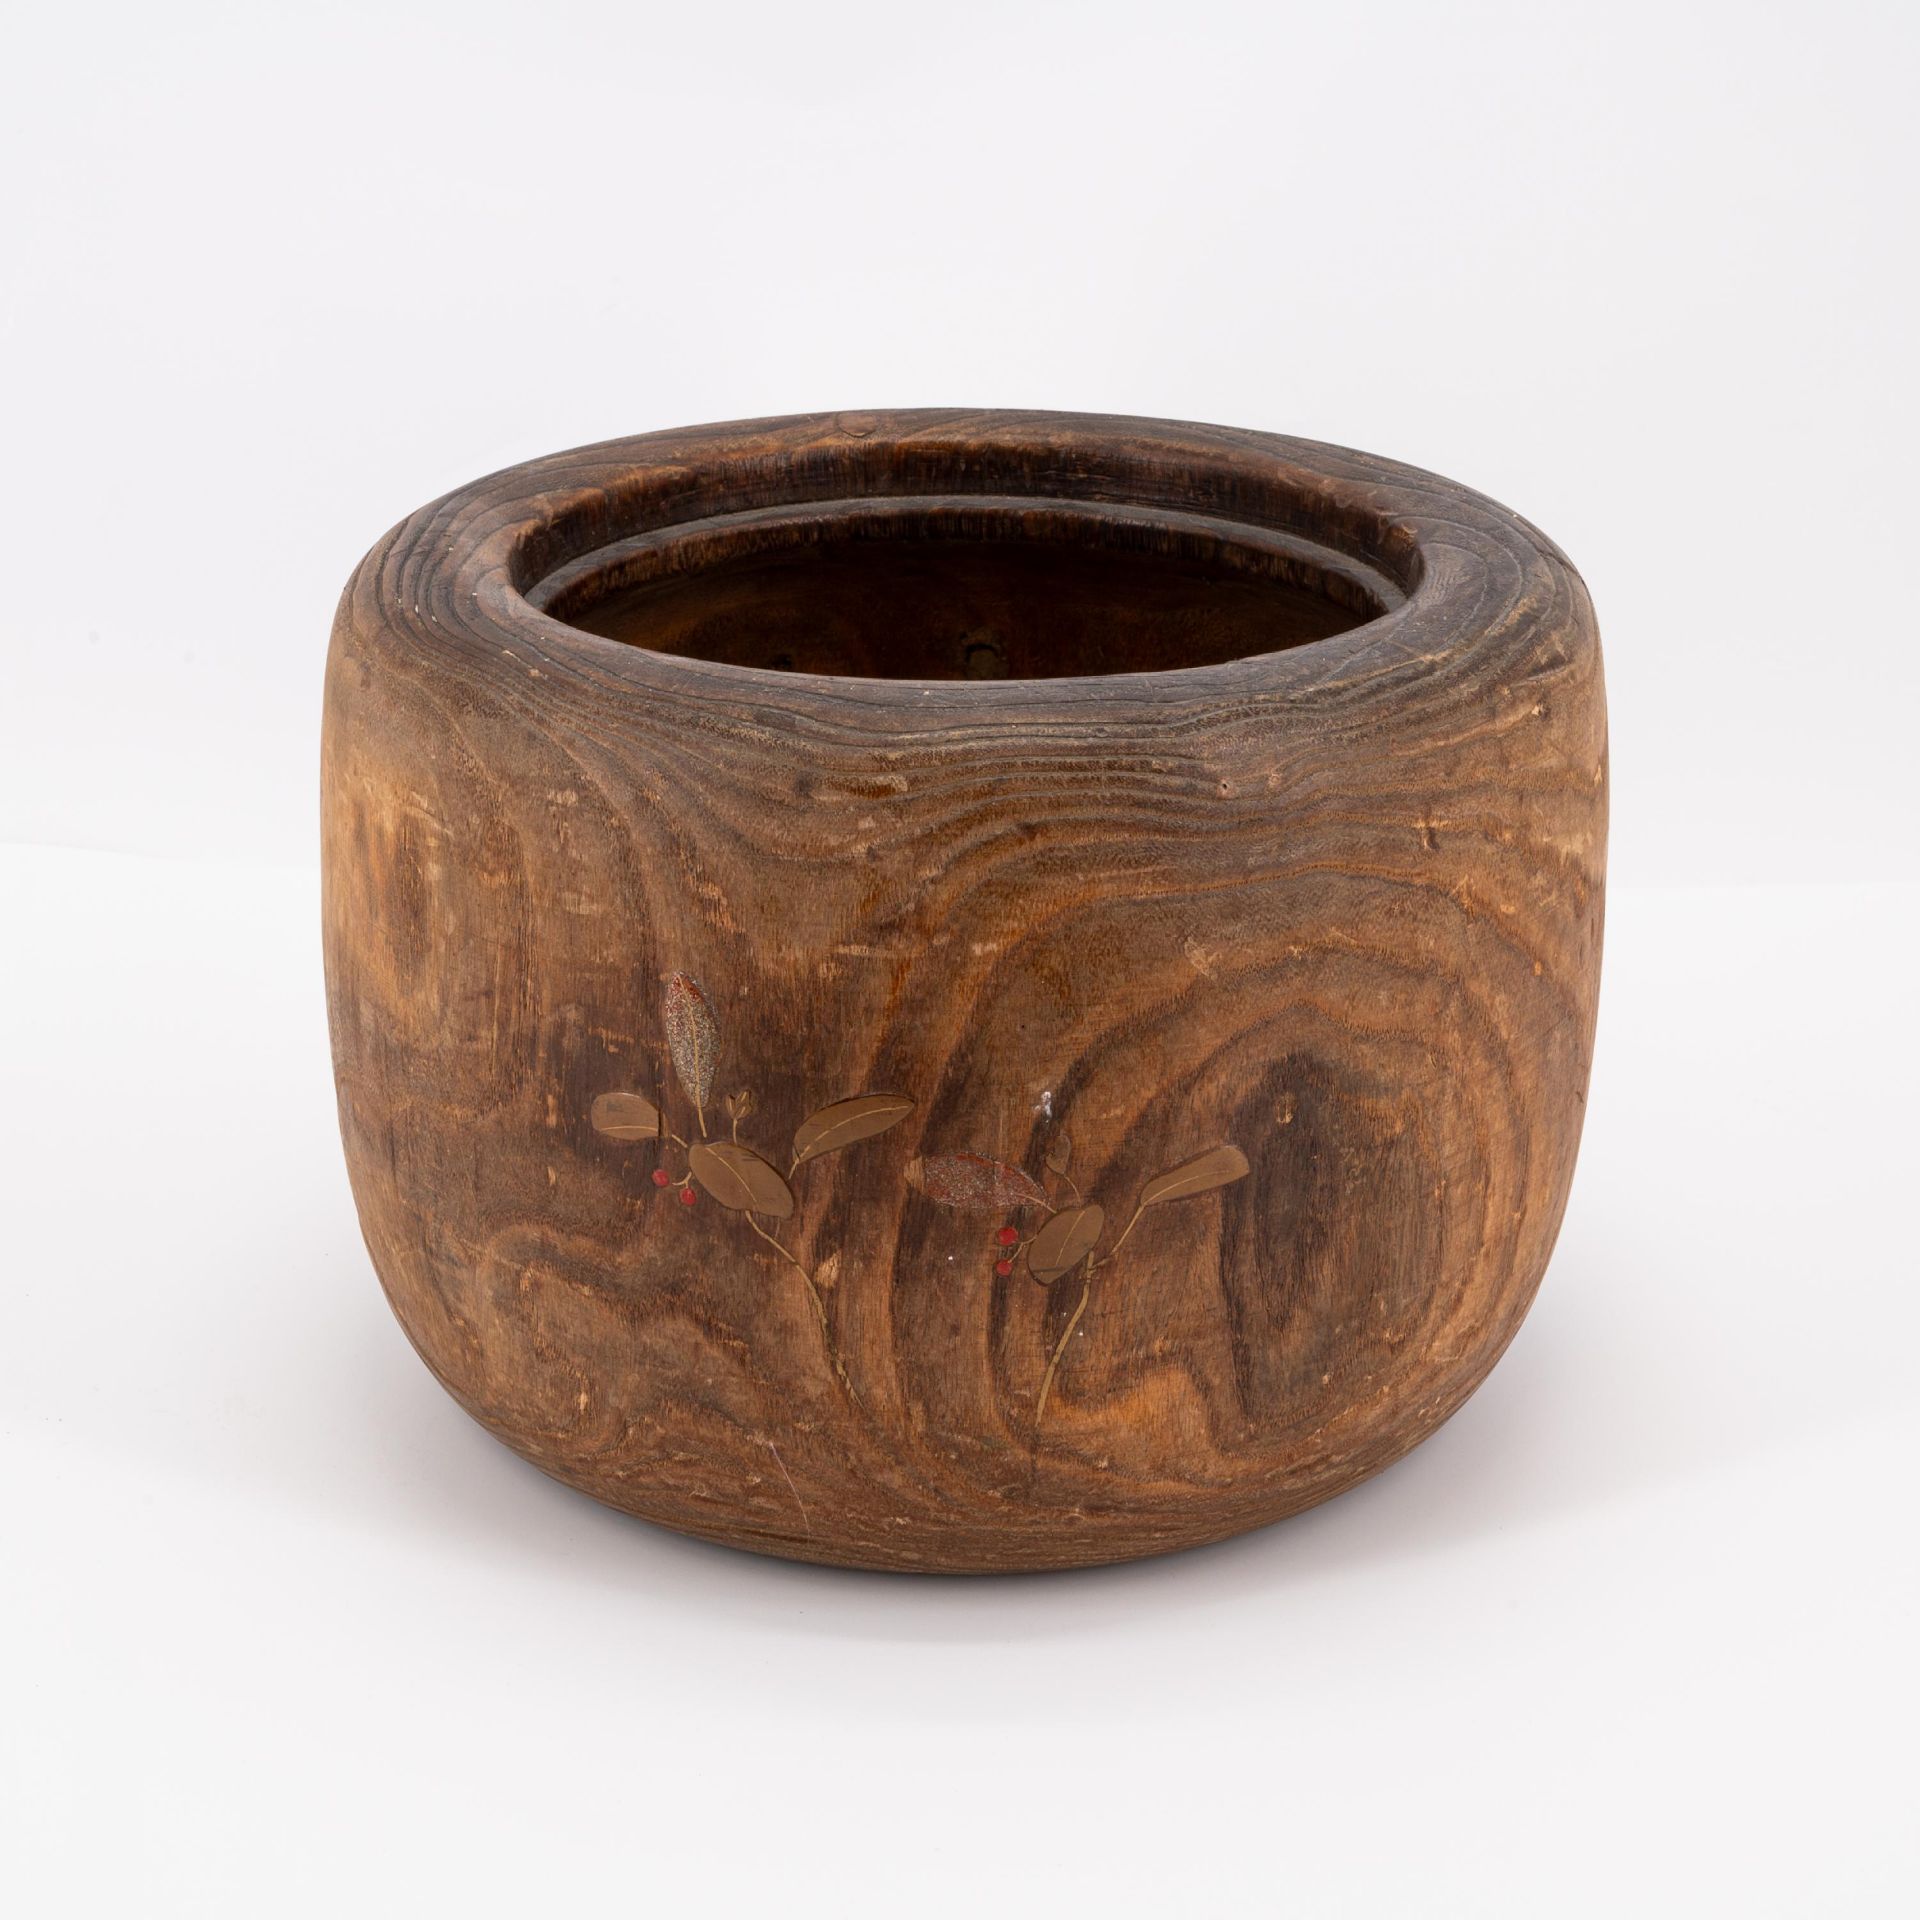 TWO WOODEN AND COPPER COAL BASINS, SO-CALLED HIBACHI WITH FLORAL DECOR - Image 8 of 11